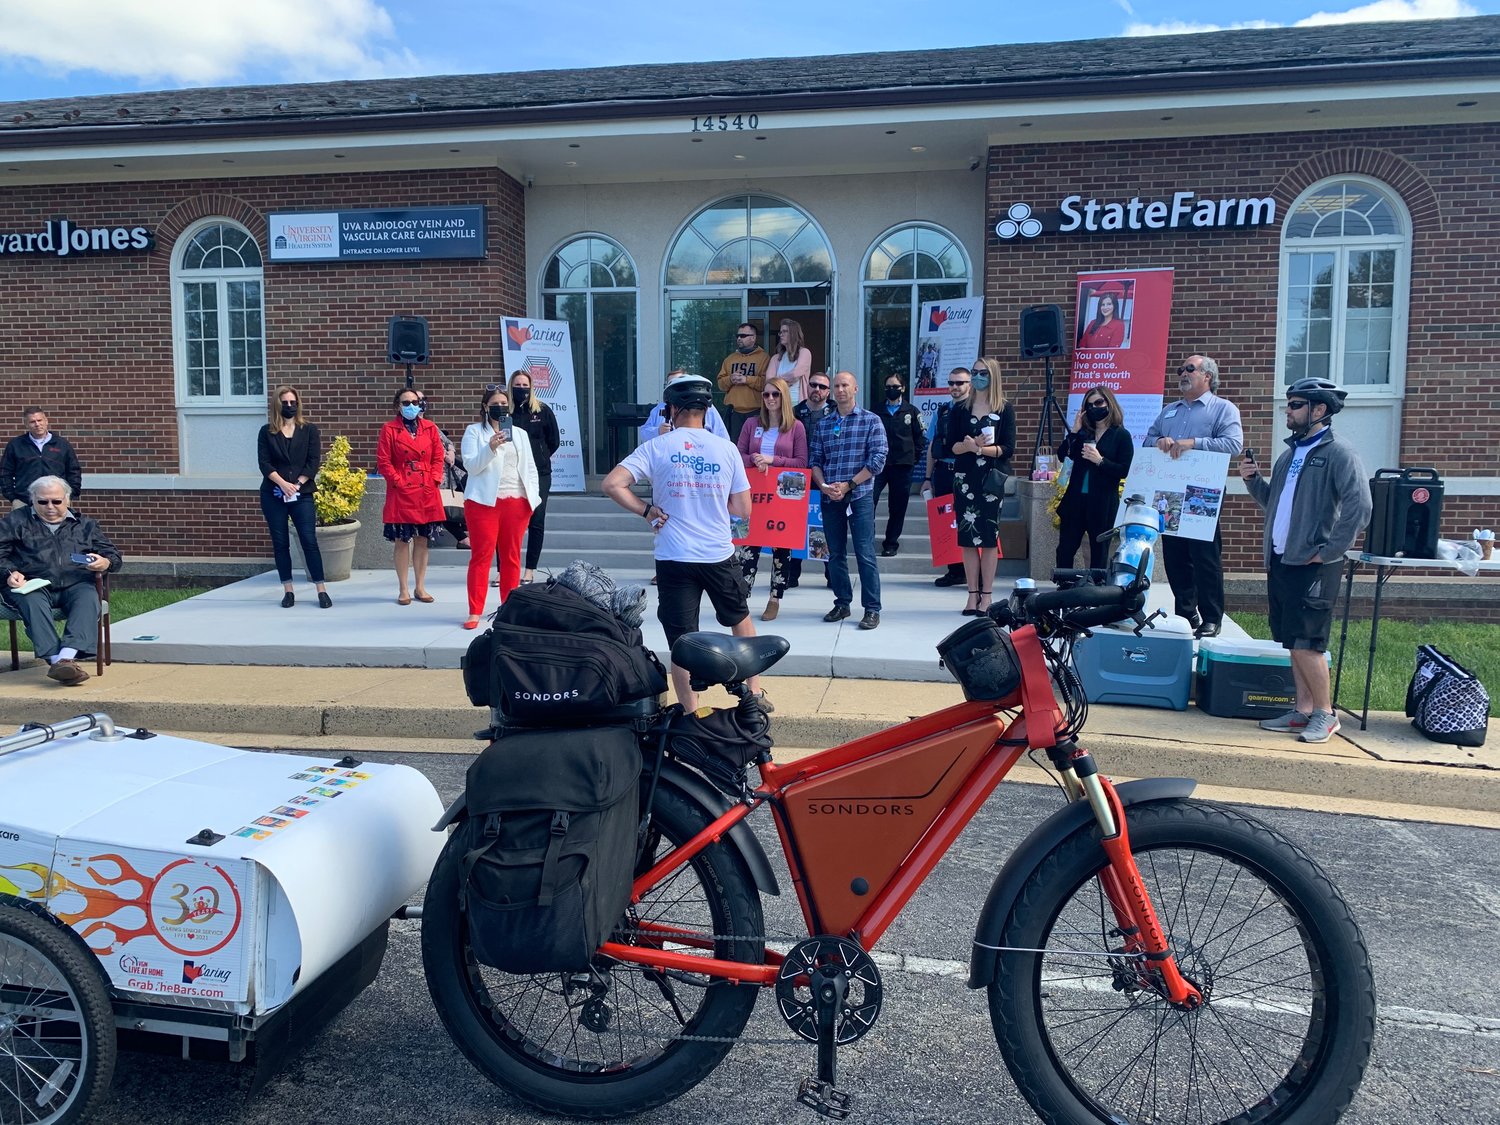 Caring Senior Service founder Jeff Salter rolls up to Caring Senior Service's Northern Virginia office in Gainesville, promoting the company's 'Grab the Bars' fundraising campaign.